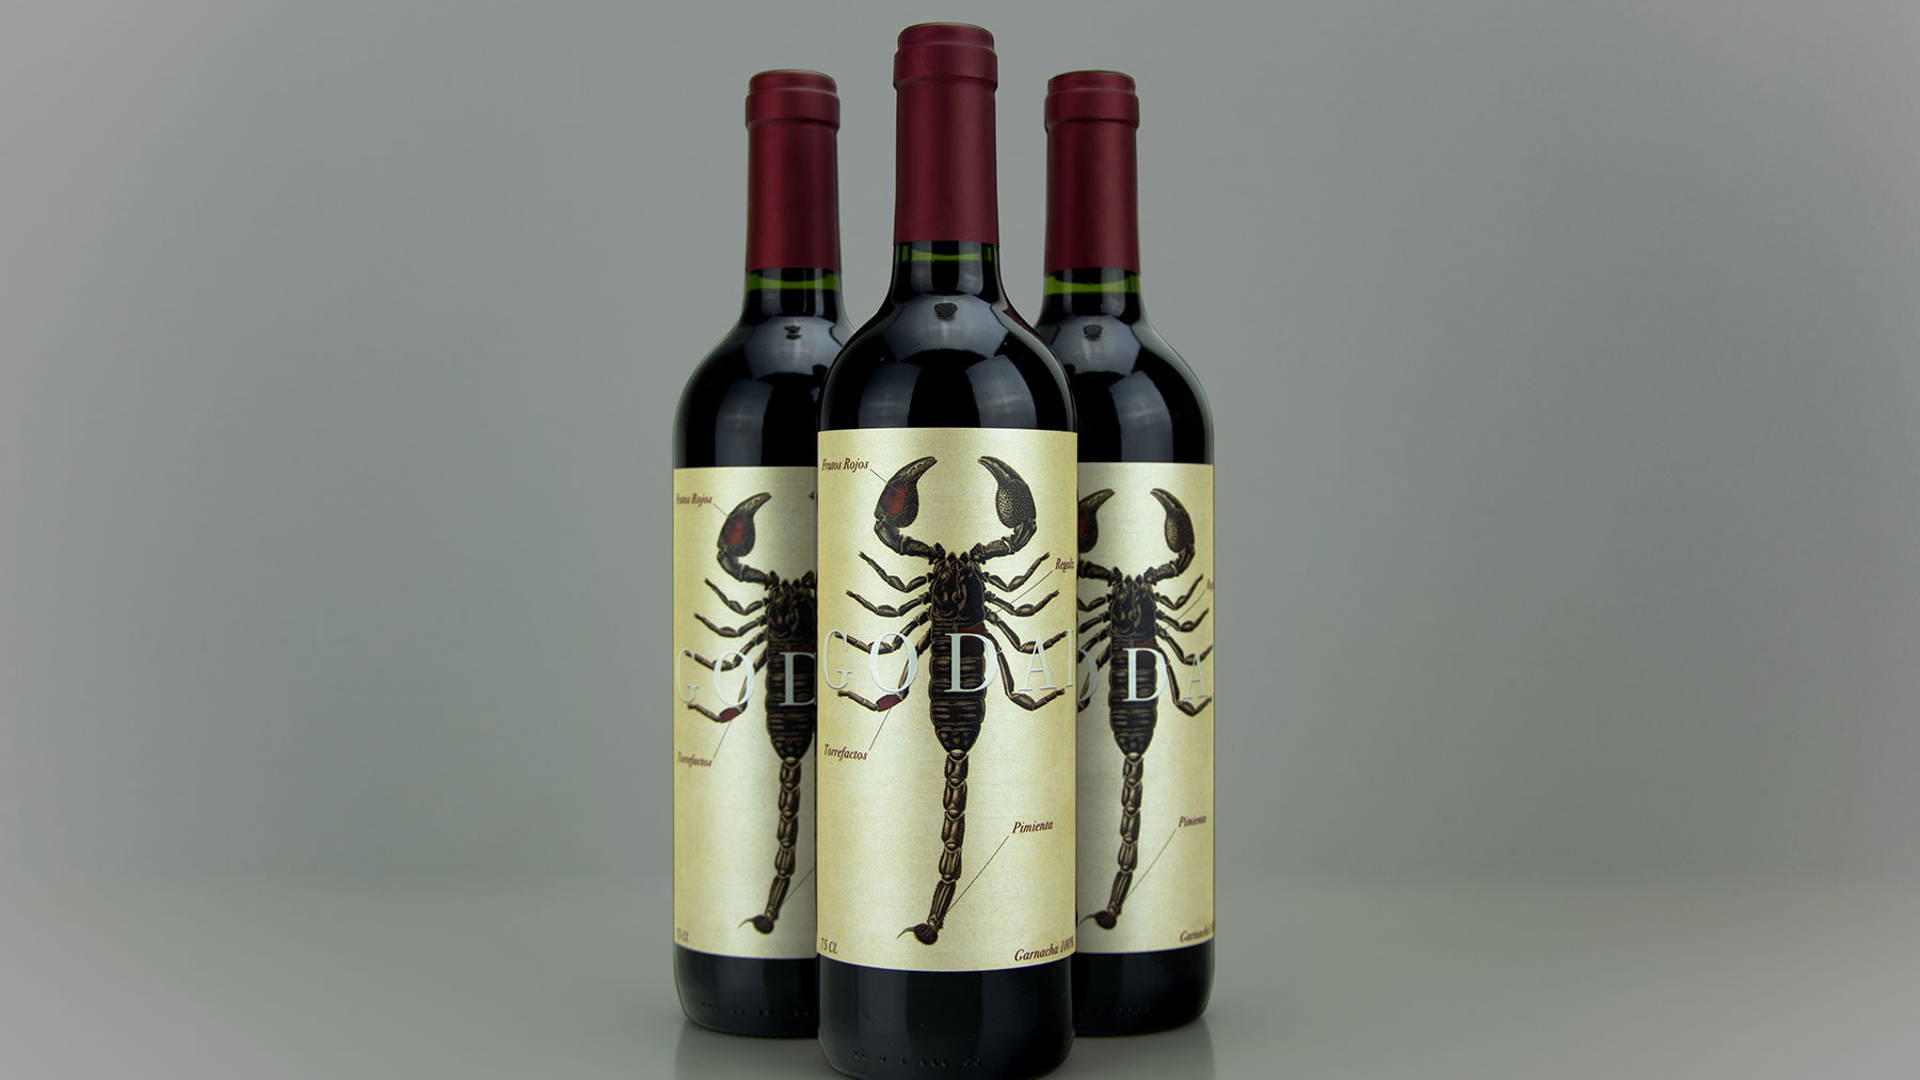 Featured image for The Label For This Wine Was Inspired By A Spanish Regions Scorpion-Filled Terrain